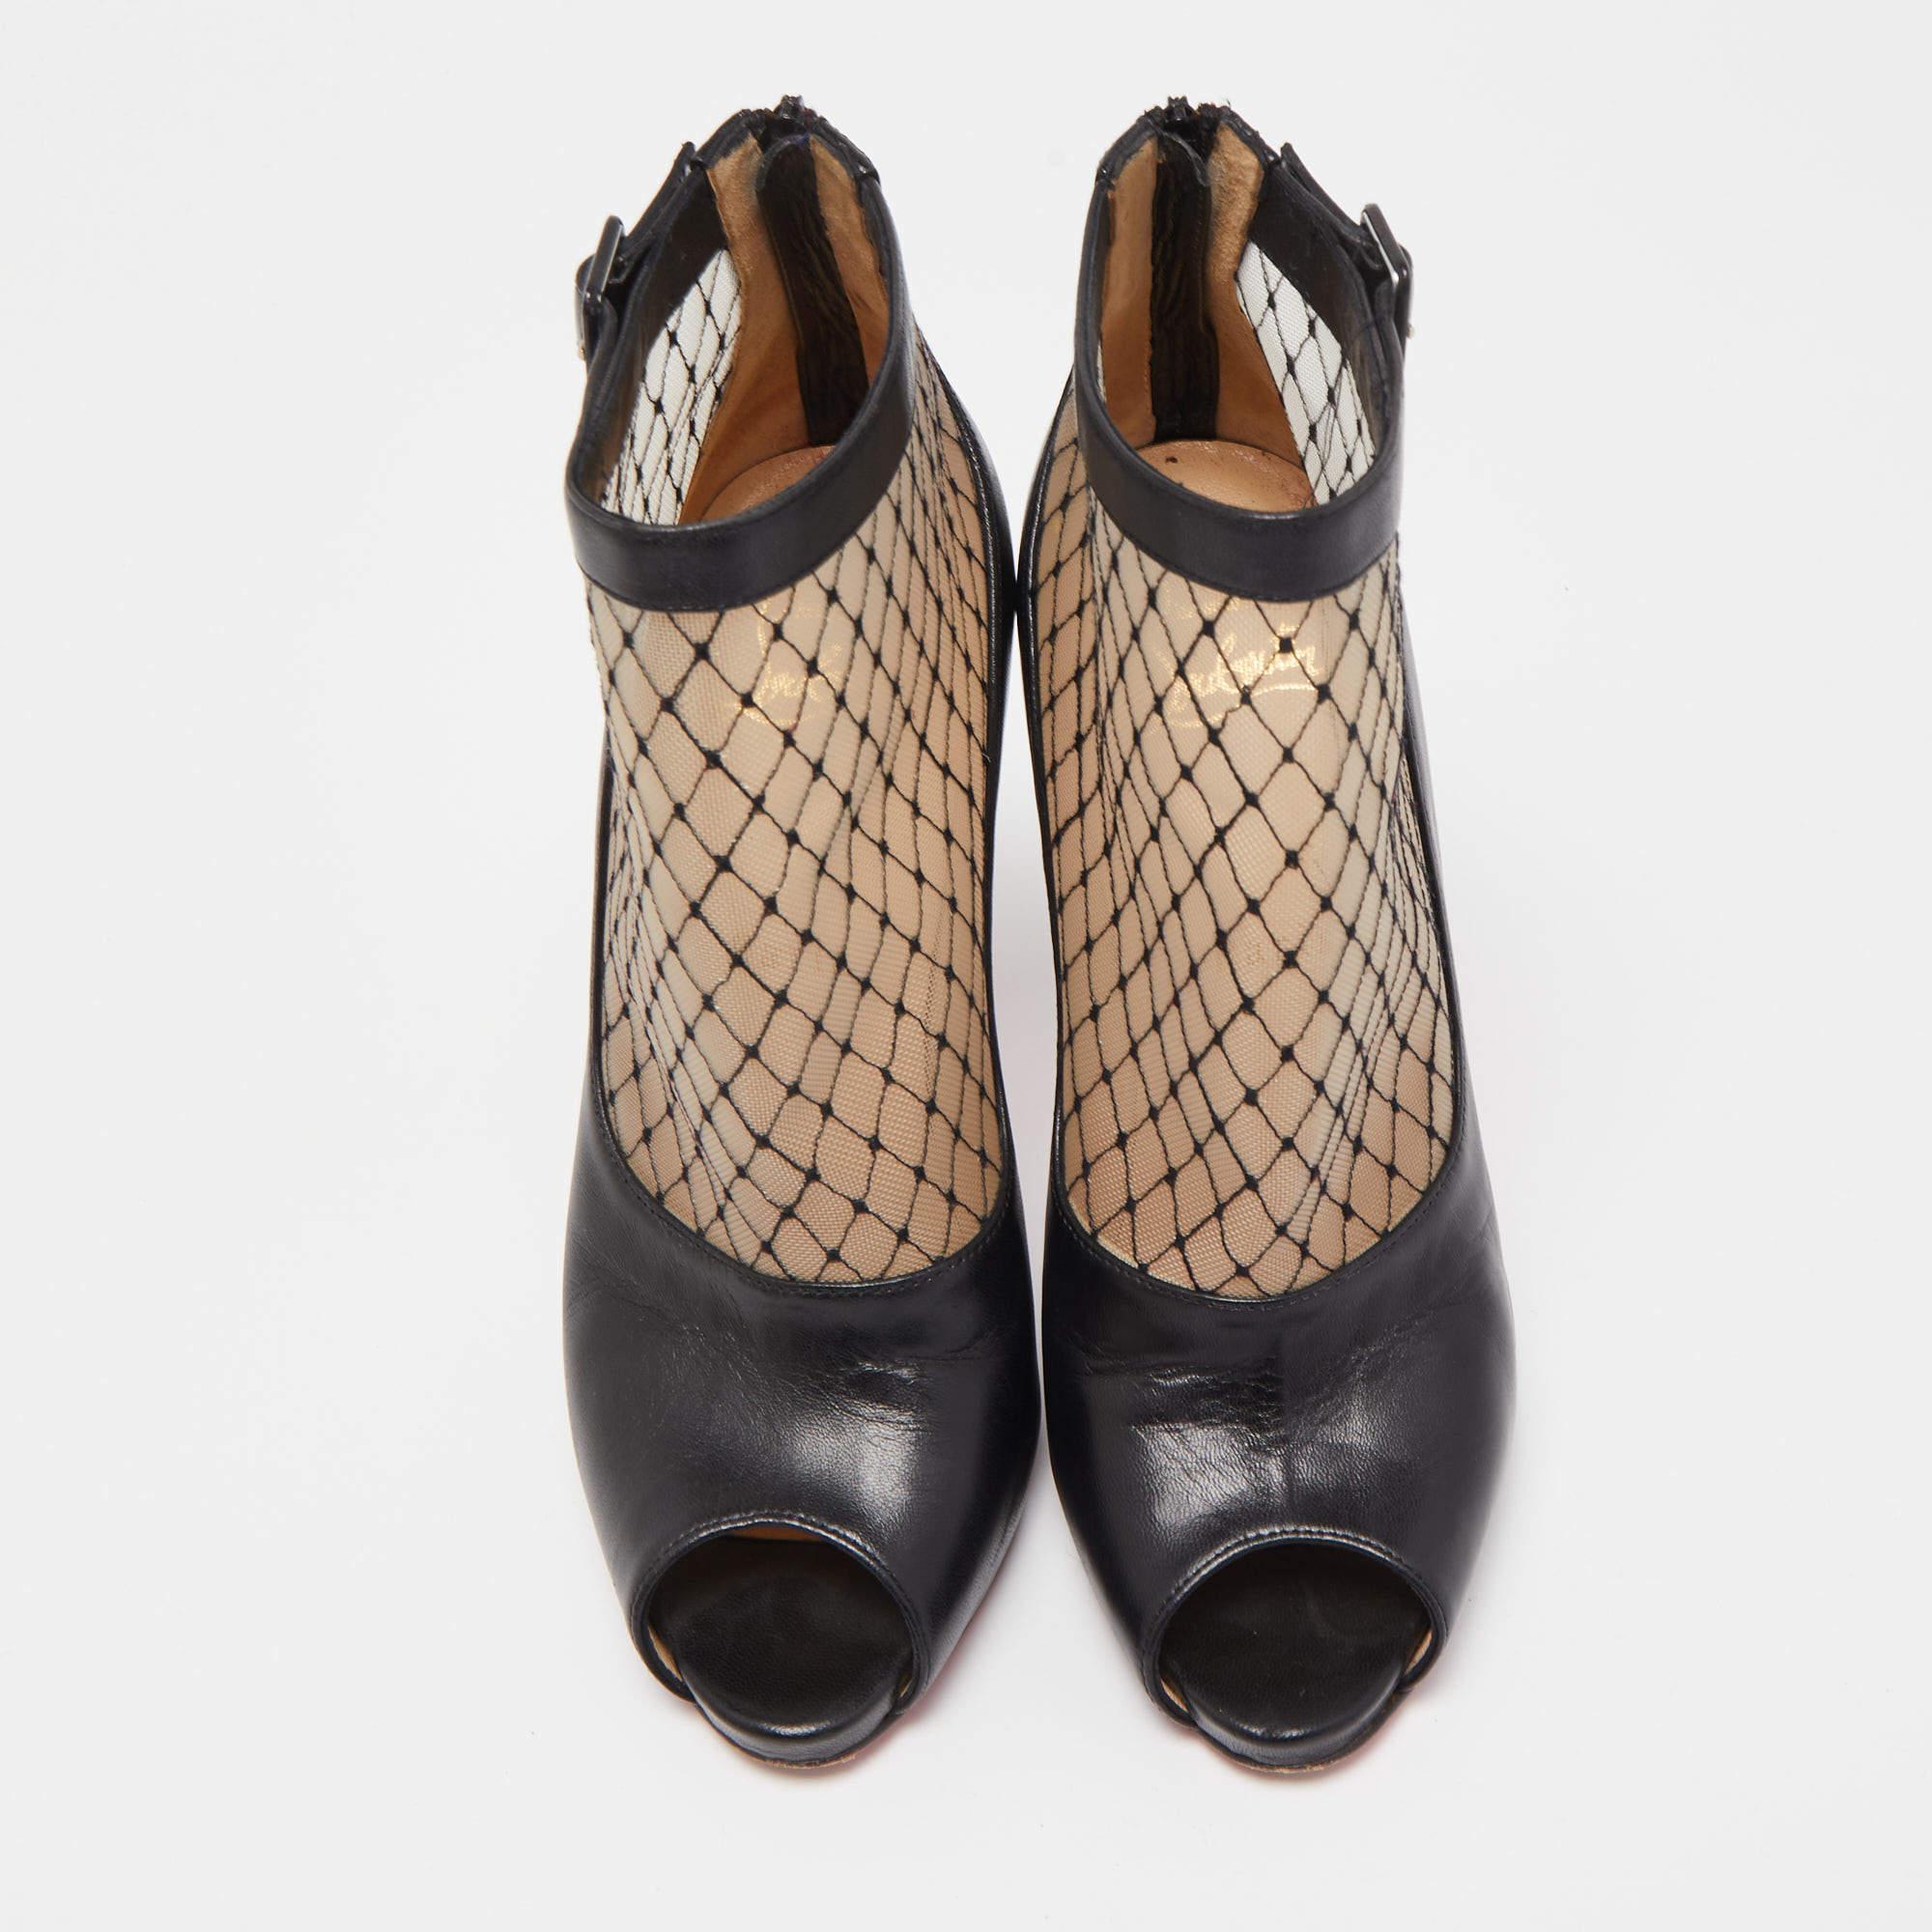 Christian Louboutin Black/Beige Mesh and Leather Ankle Boots For Sale 2